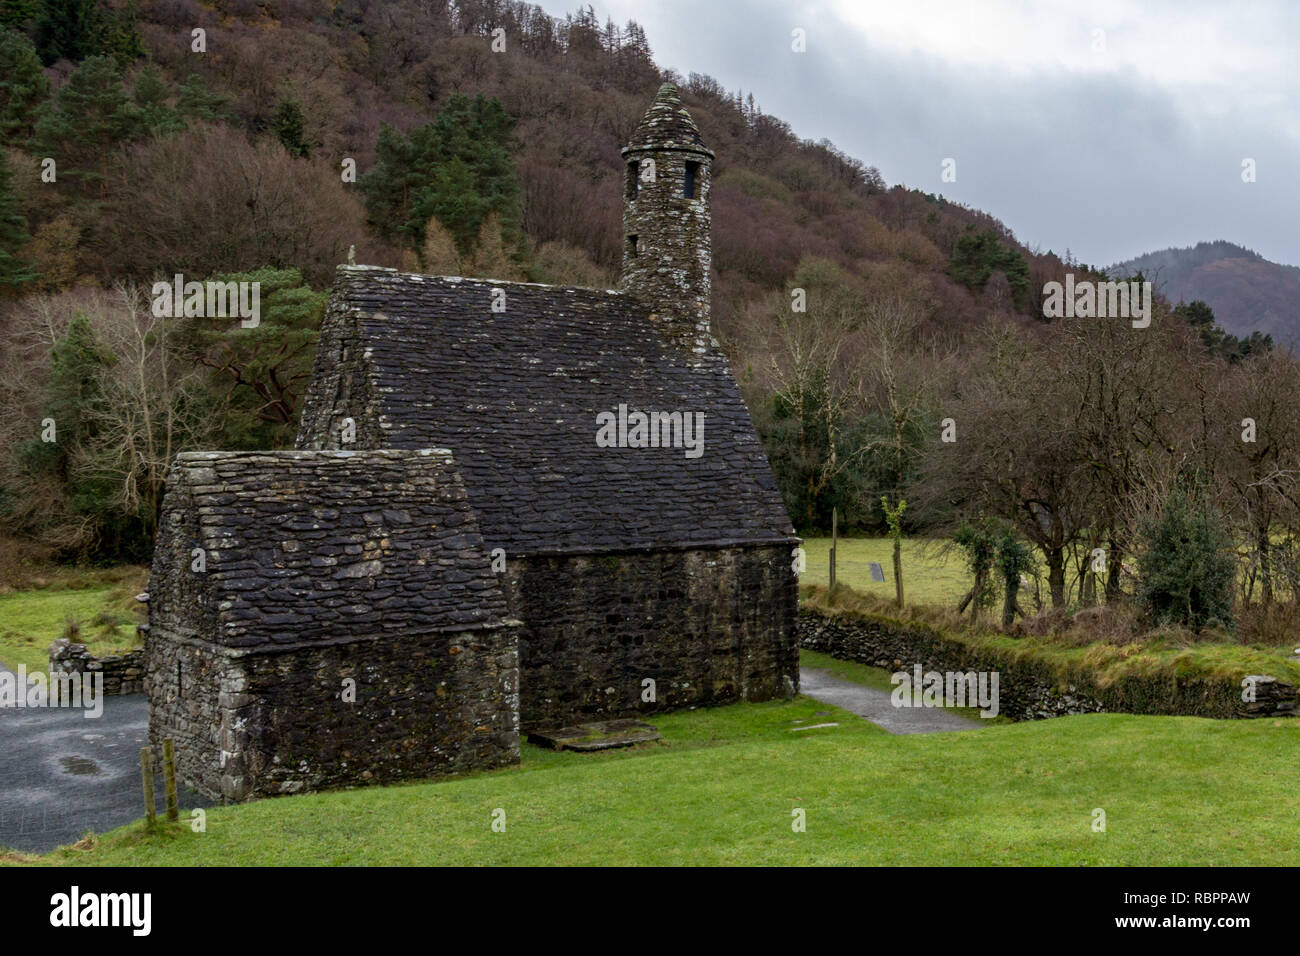 Saint Kevin's Kitchen at the Glendalough Monastic Site in Wicklow, Ireland Stock Photo